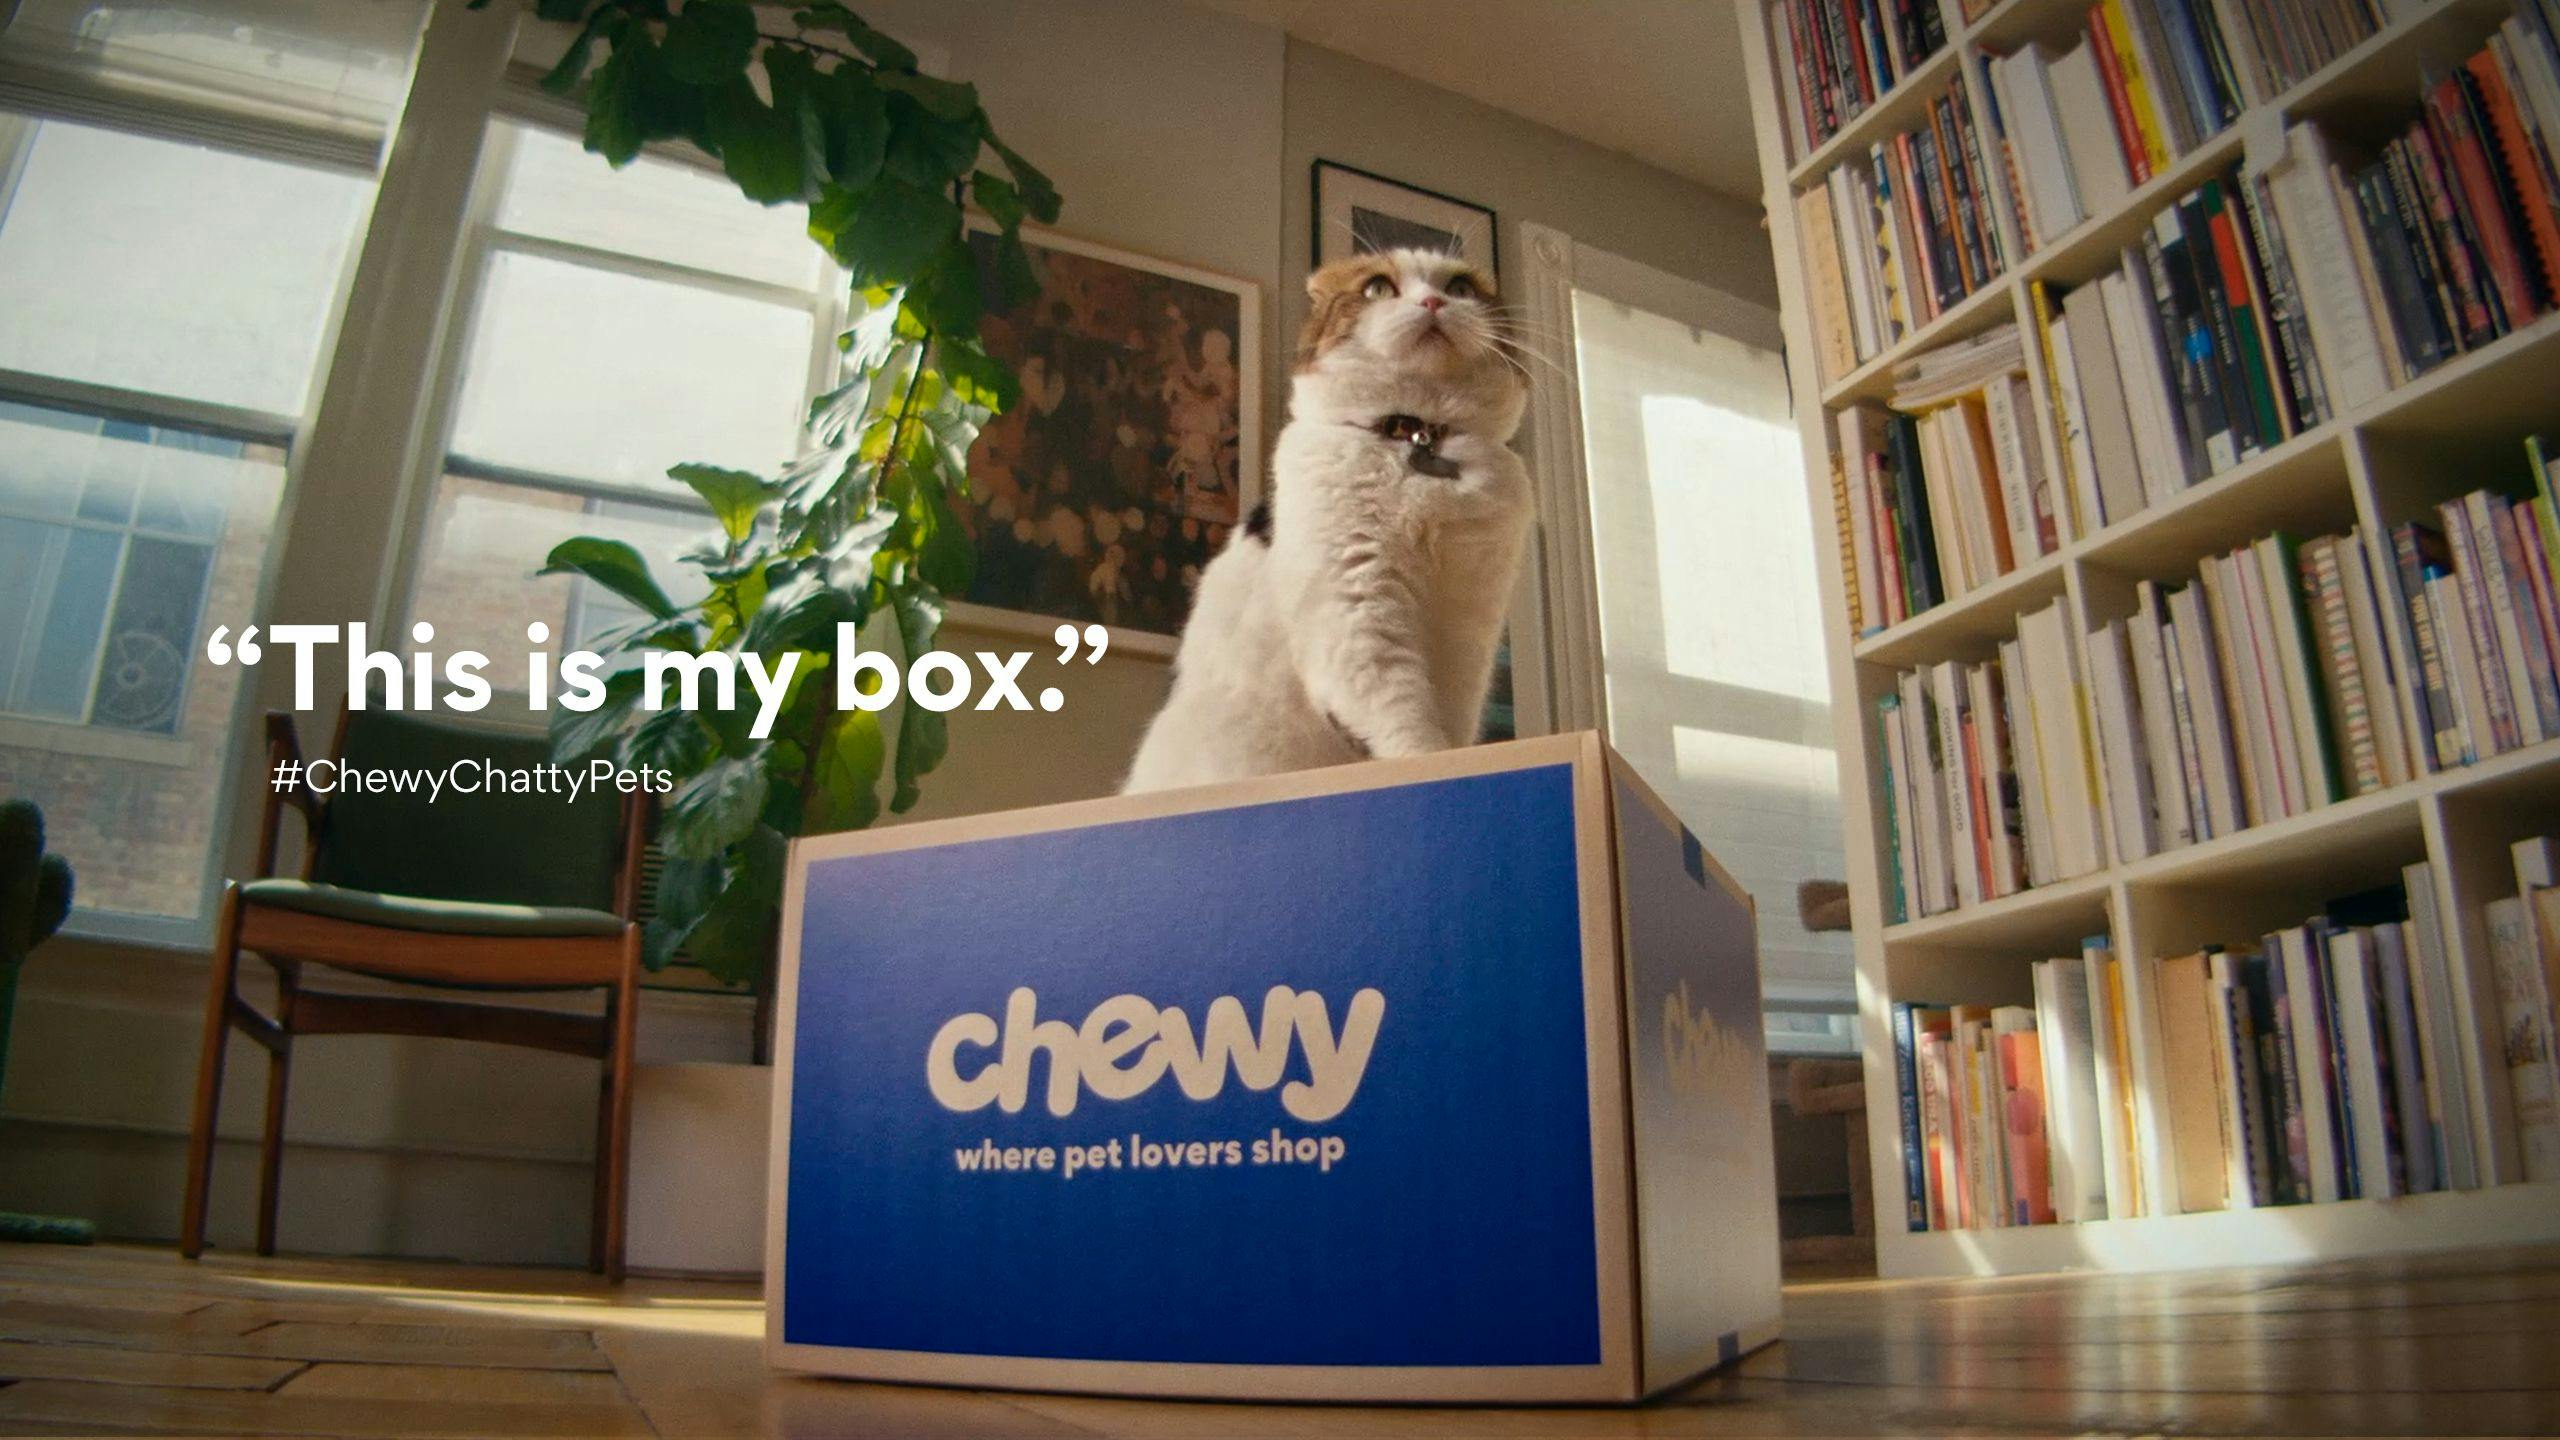 Chewy launches video campaign that vocalizes pets' inner thoughts